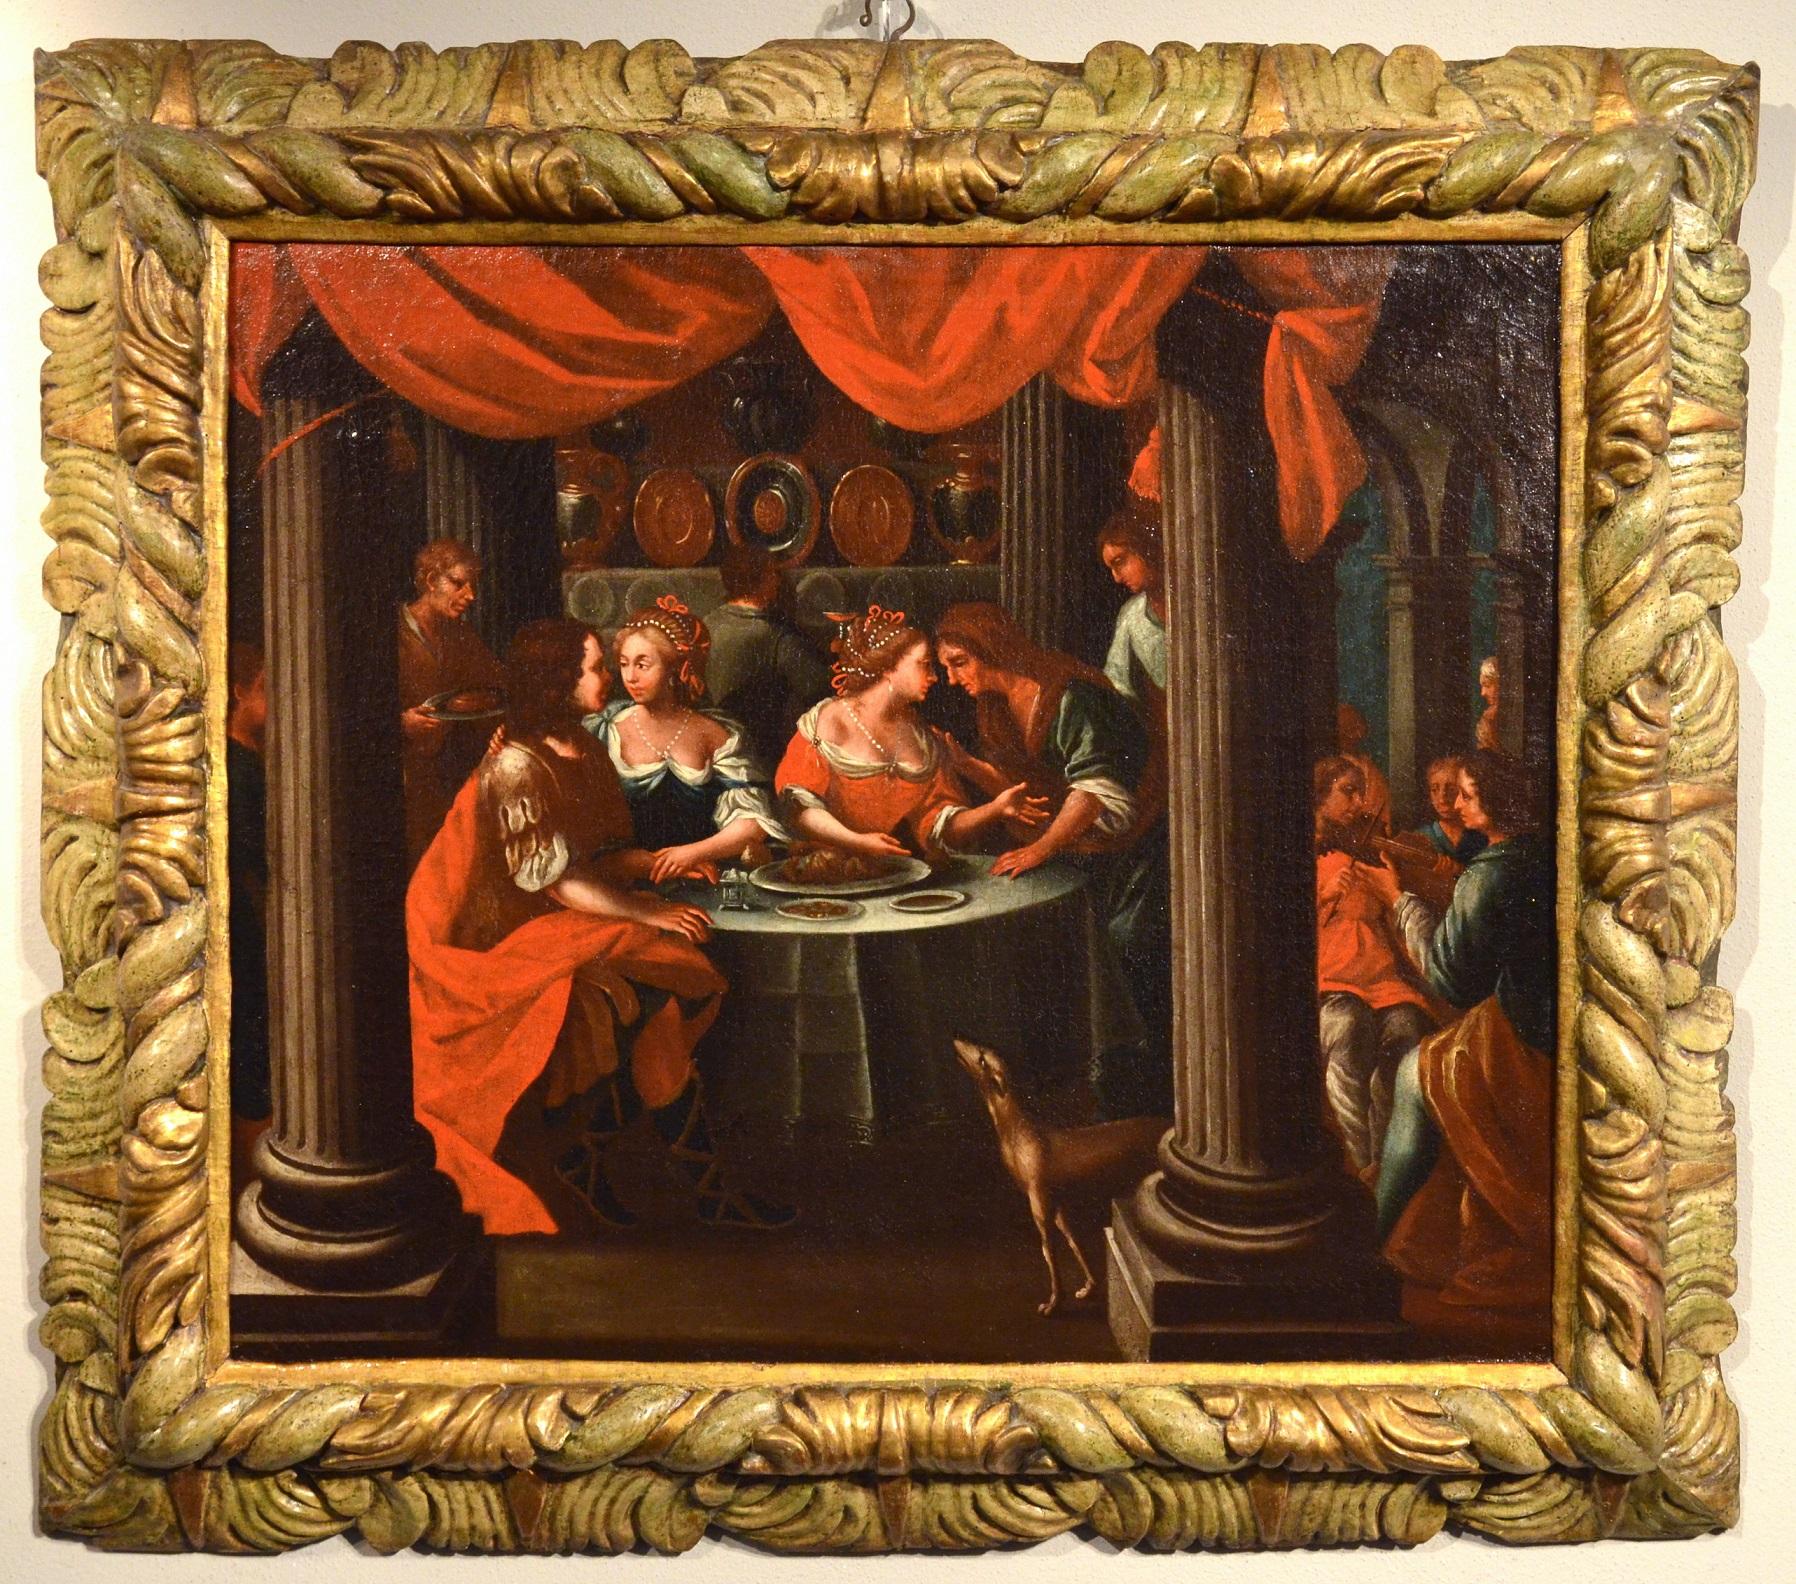 Banquet Flemish Italian Paint Oil on canvas Old master 17th Century Veronese Art - Painting by Unknown